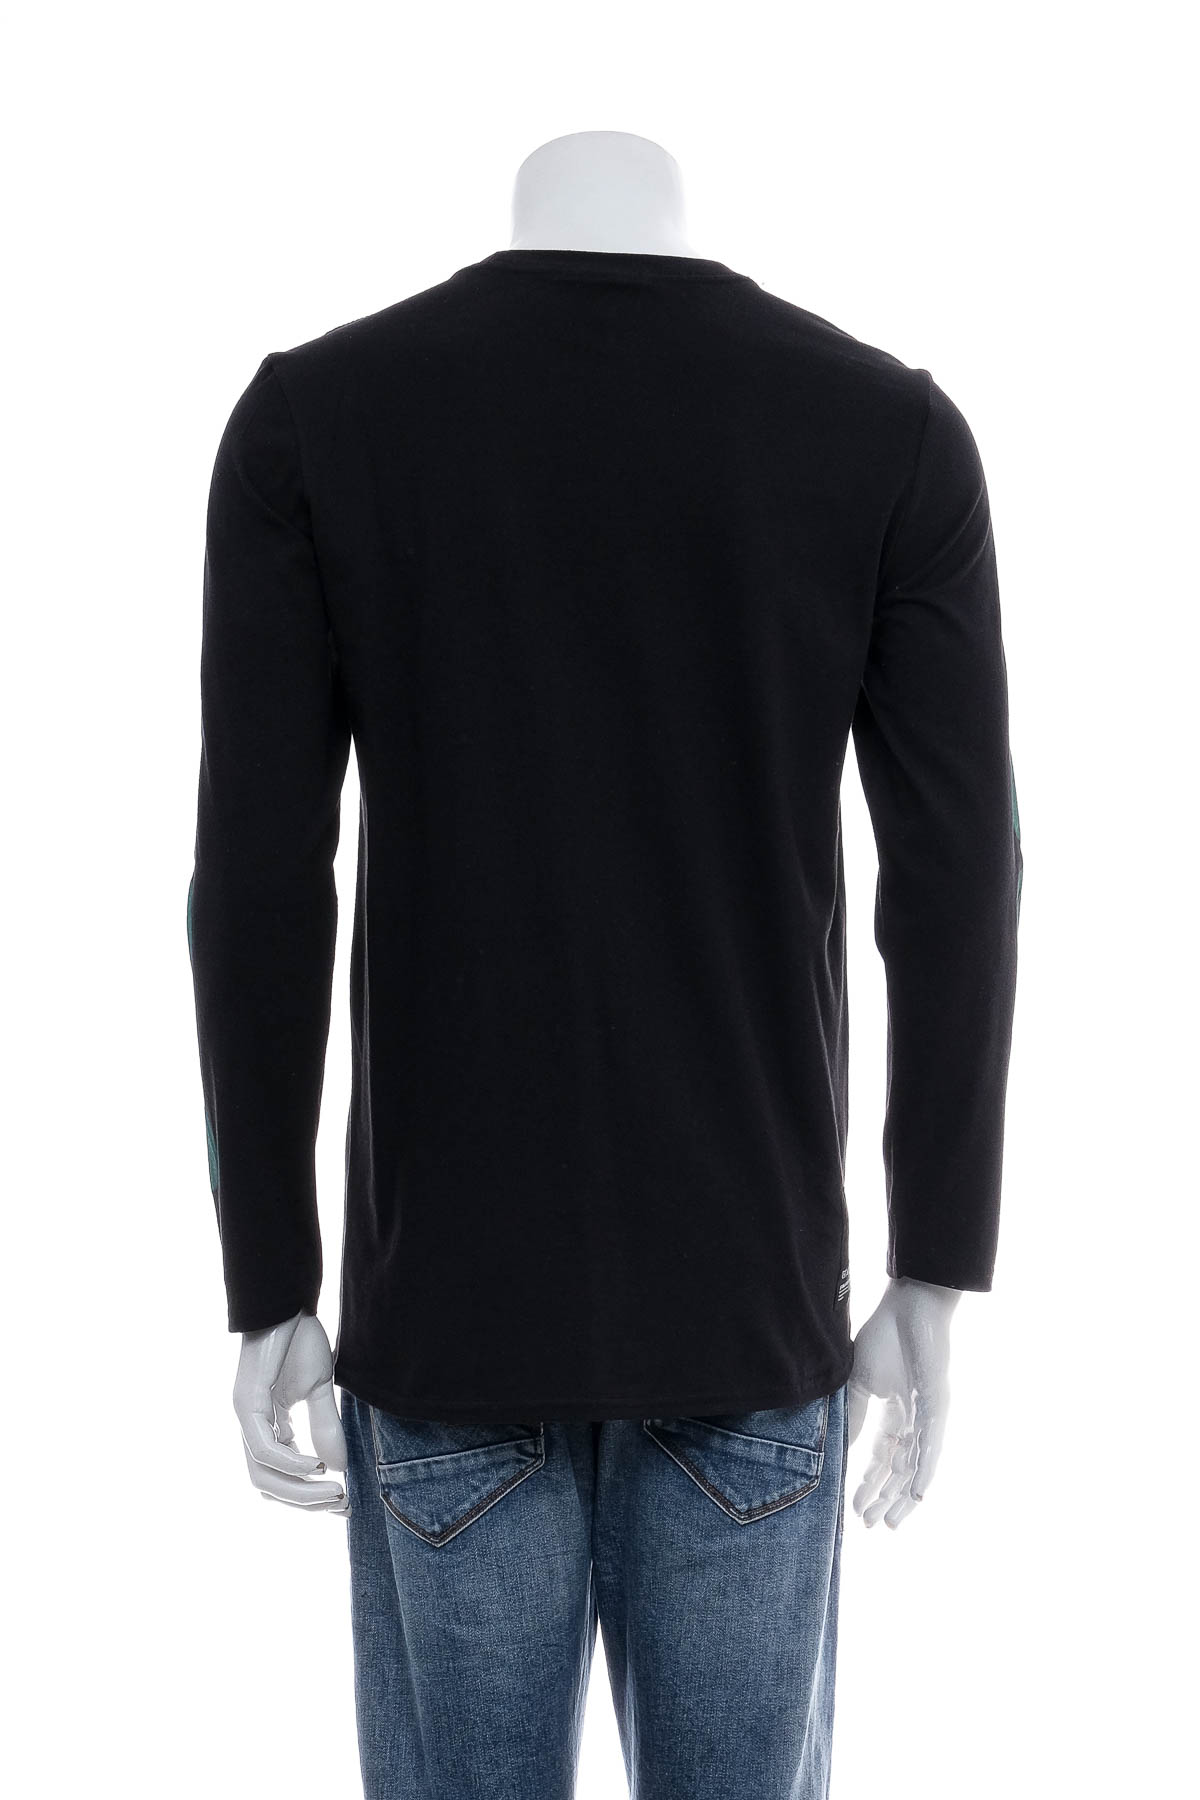 Men's blouse - Blood Brother - 1